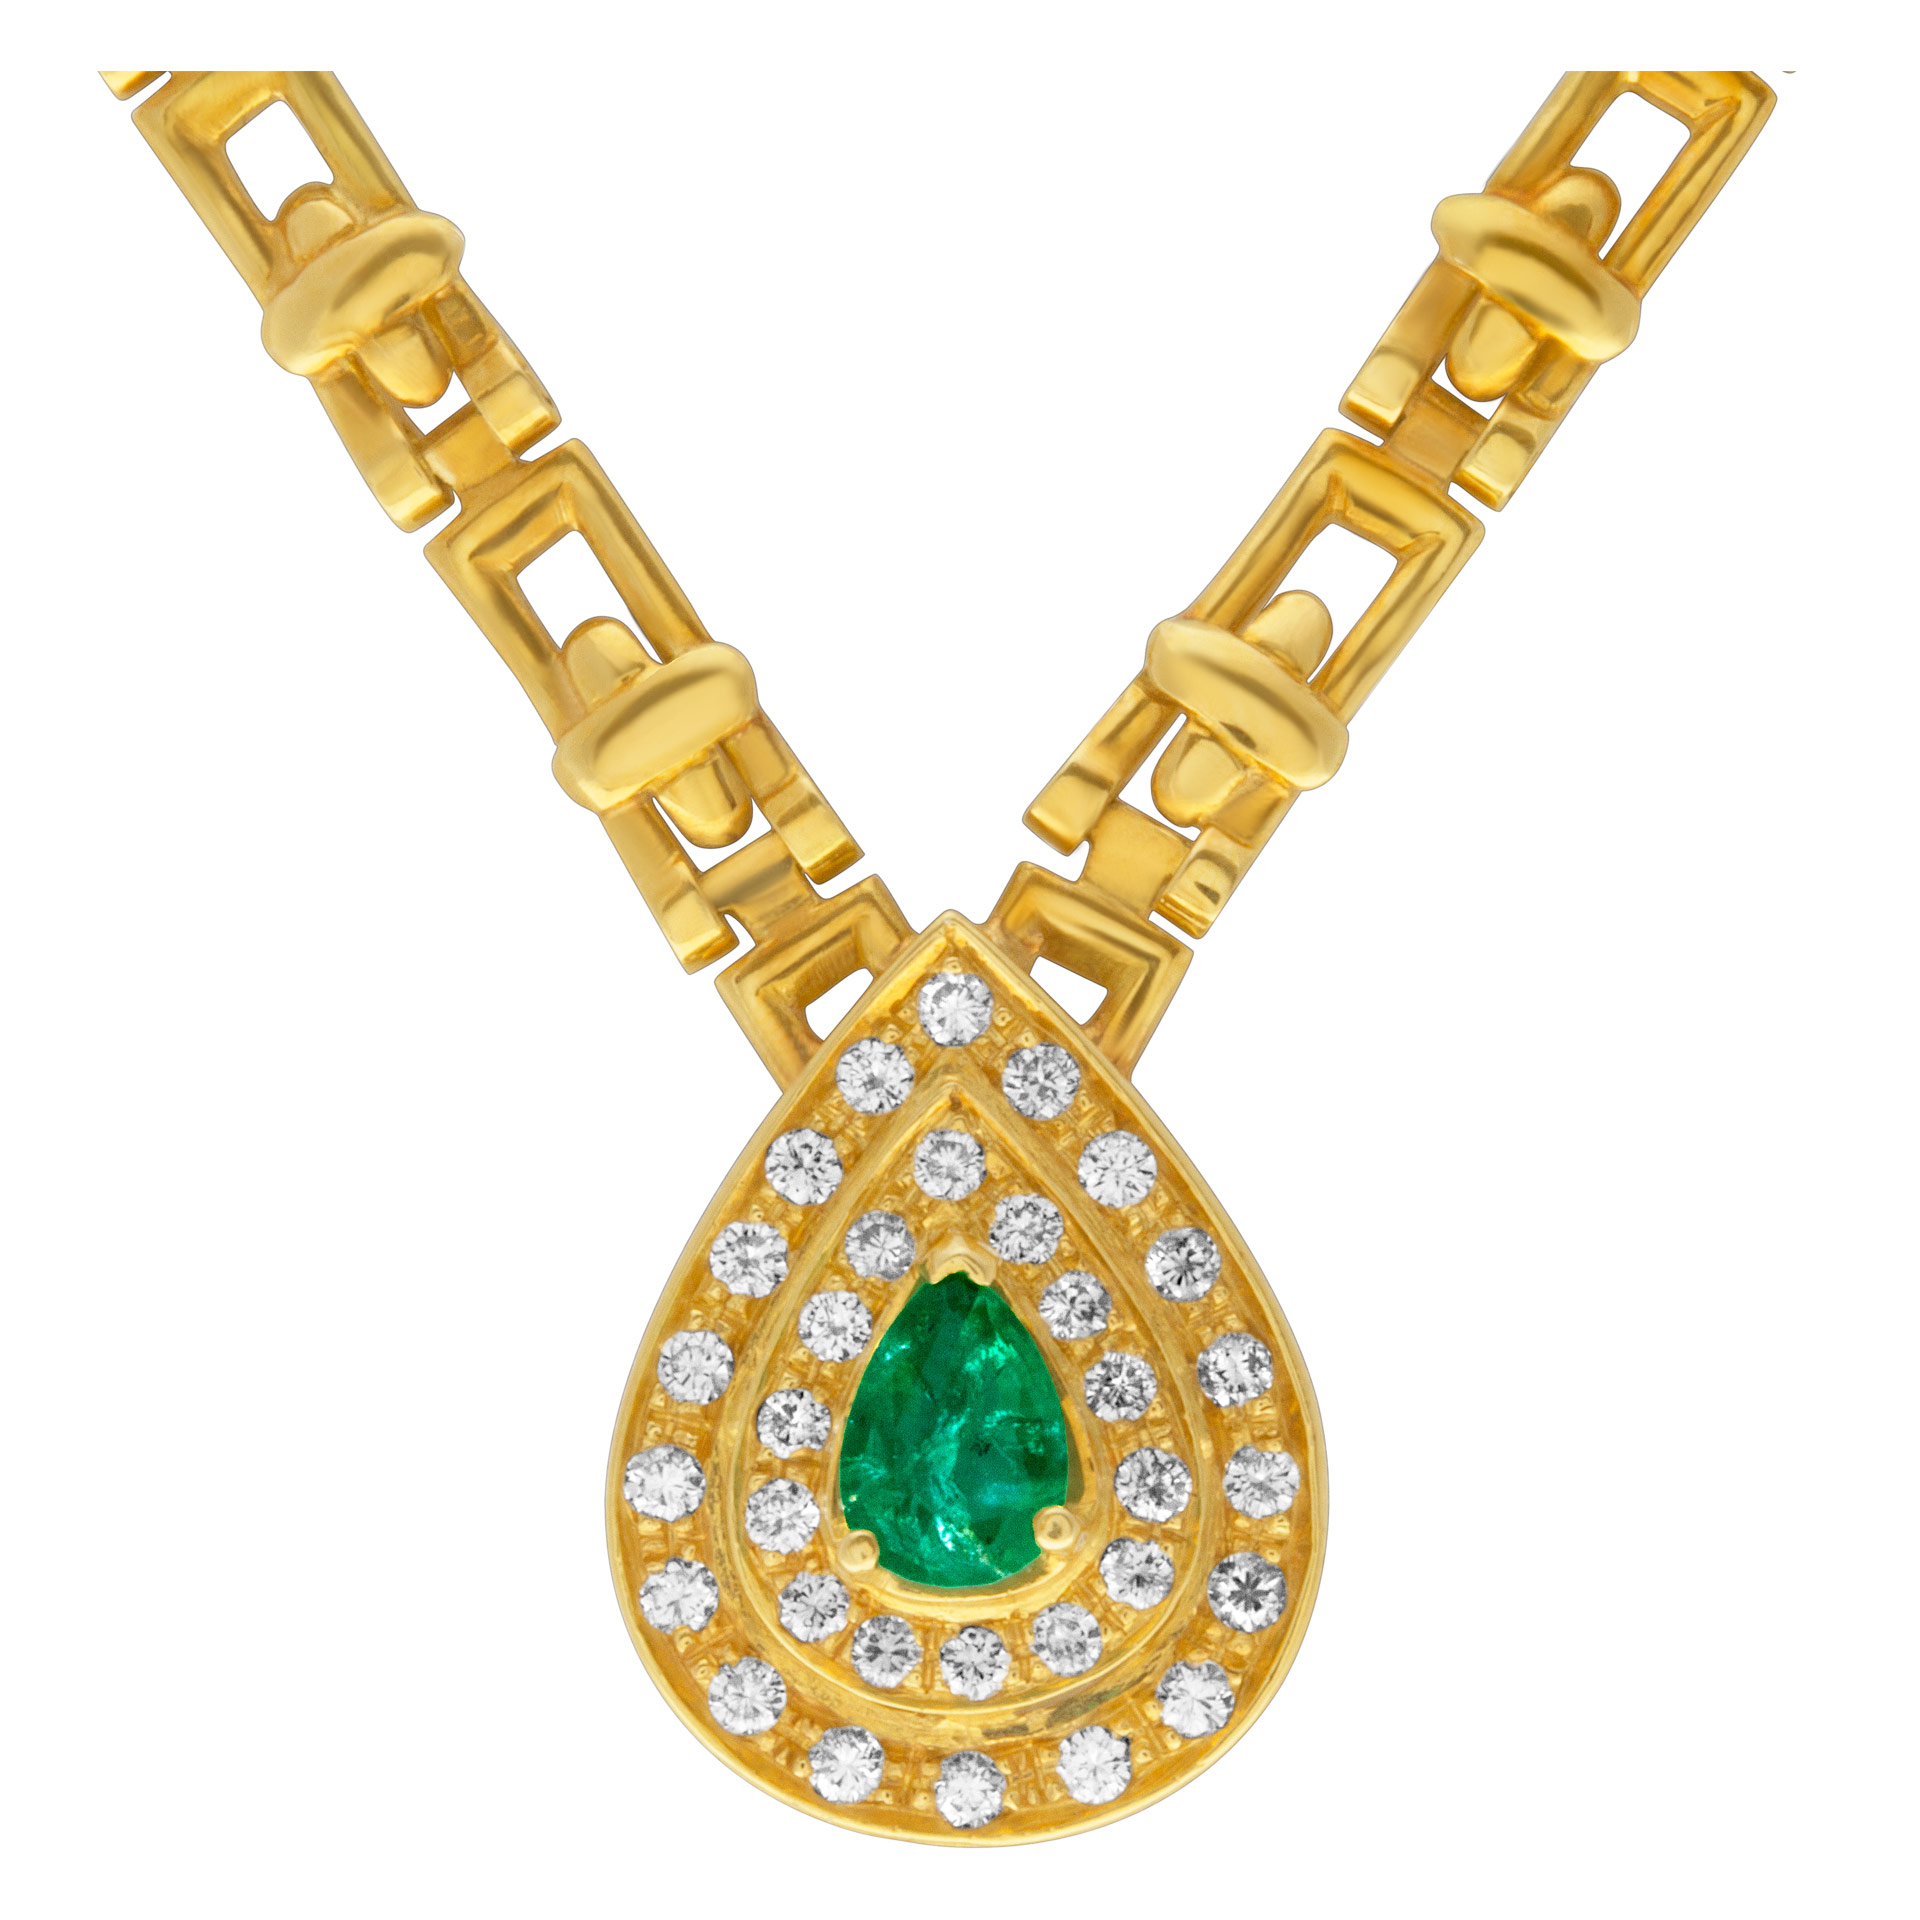 Emerald necklace with diamond accents in 18k yellow gold image 1